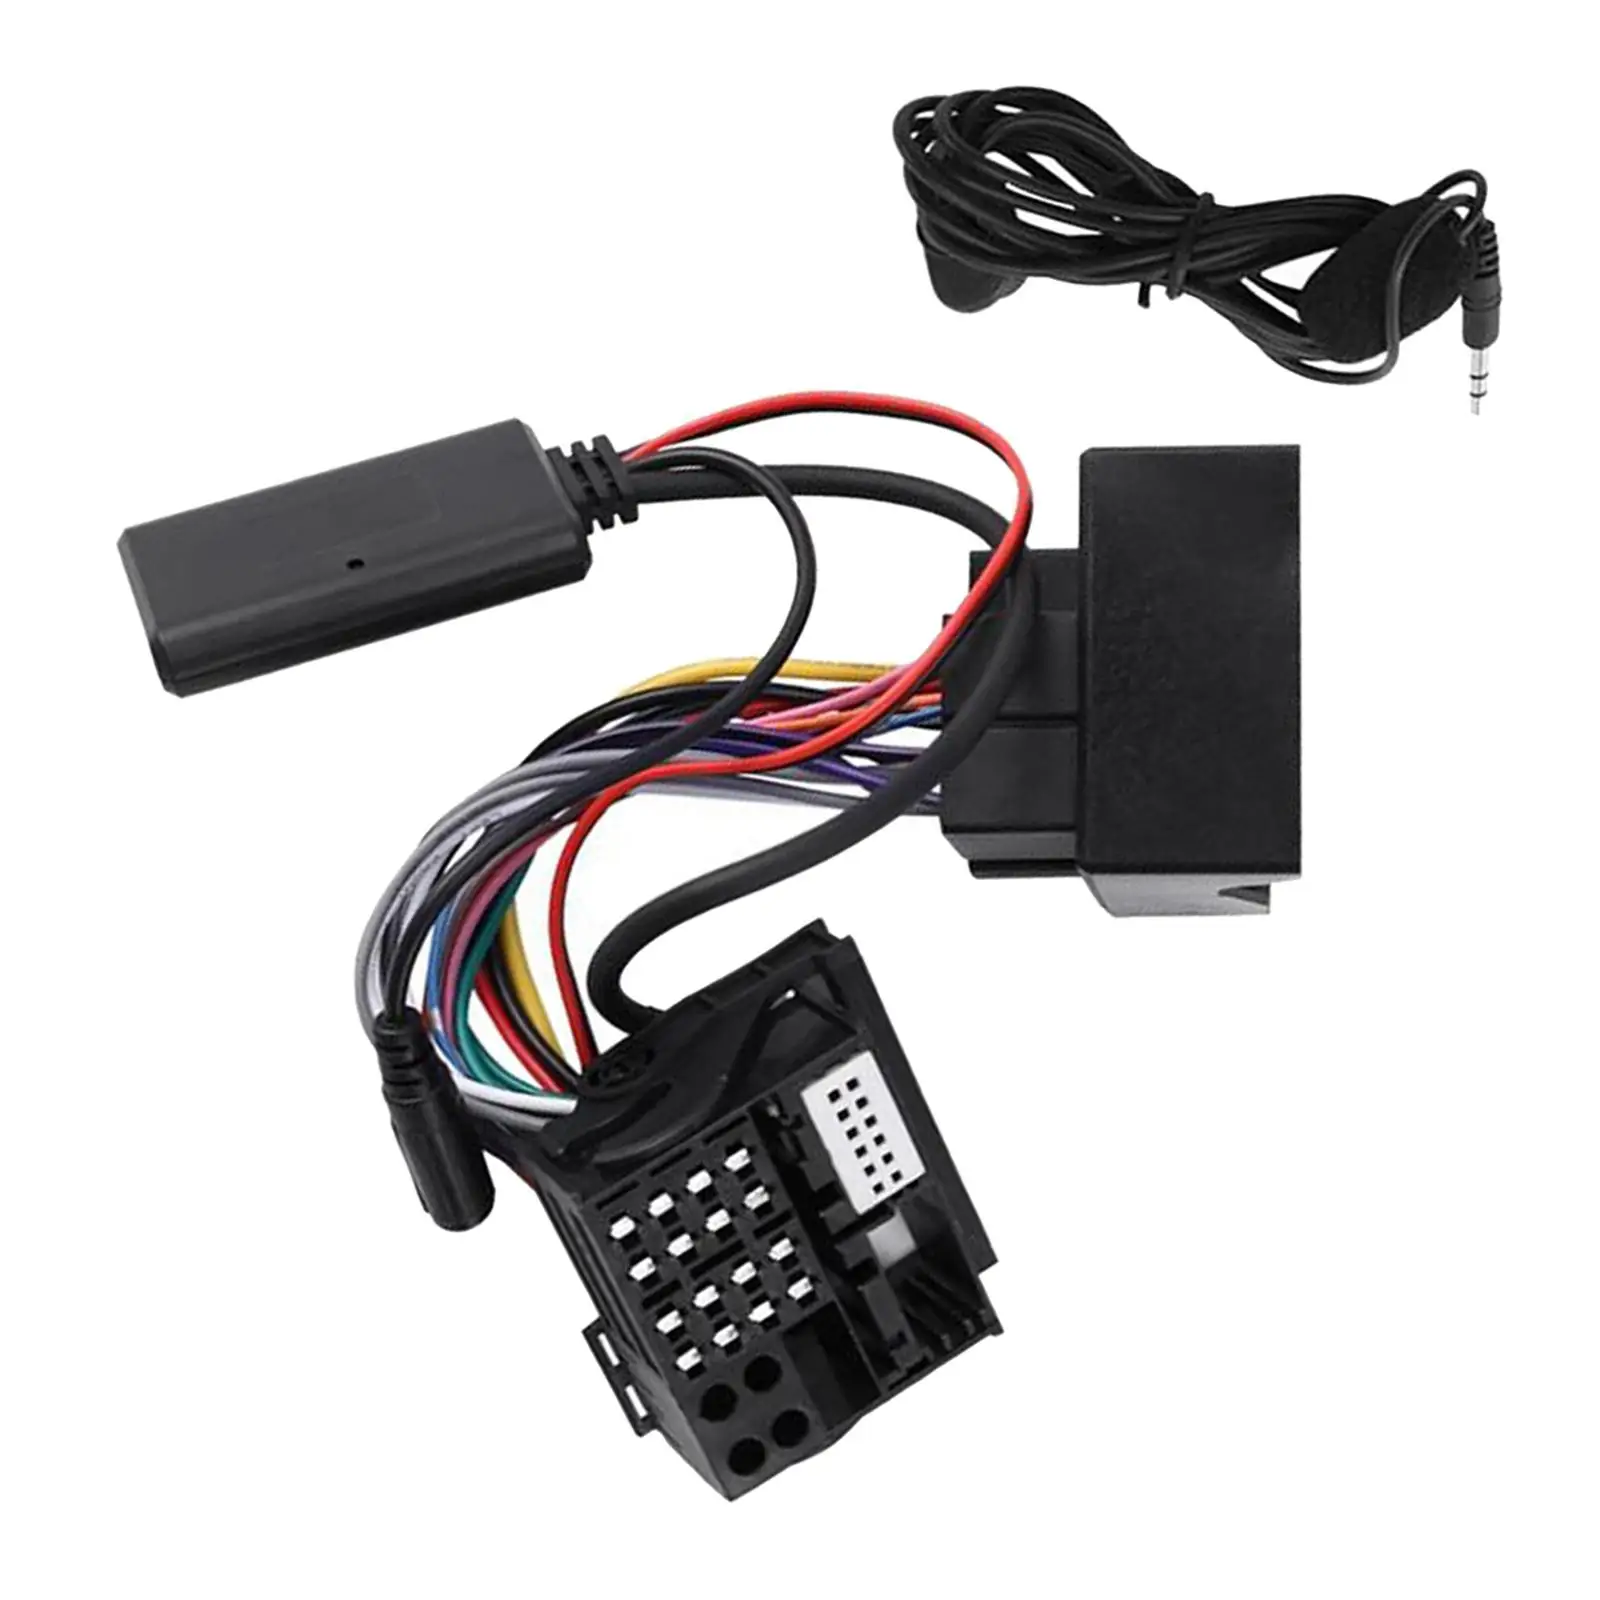 .0 Kit, with Microphone Module Audio Hands  Stereo AUX Cable Adapter, Fit for W221 W251 W203 W164